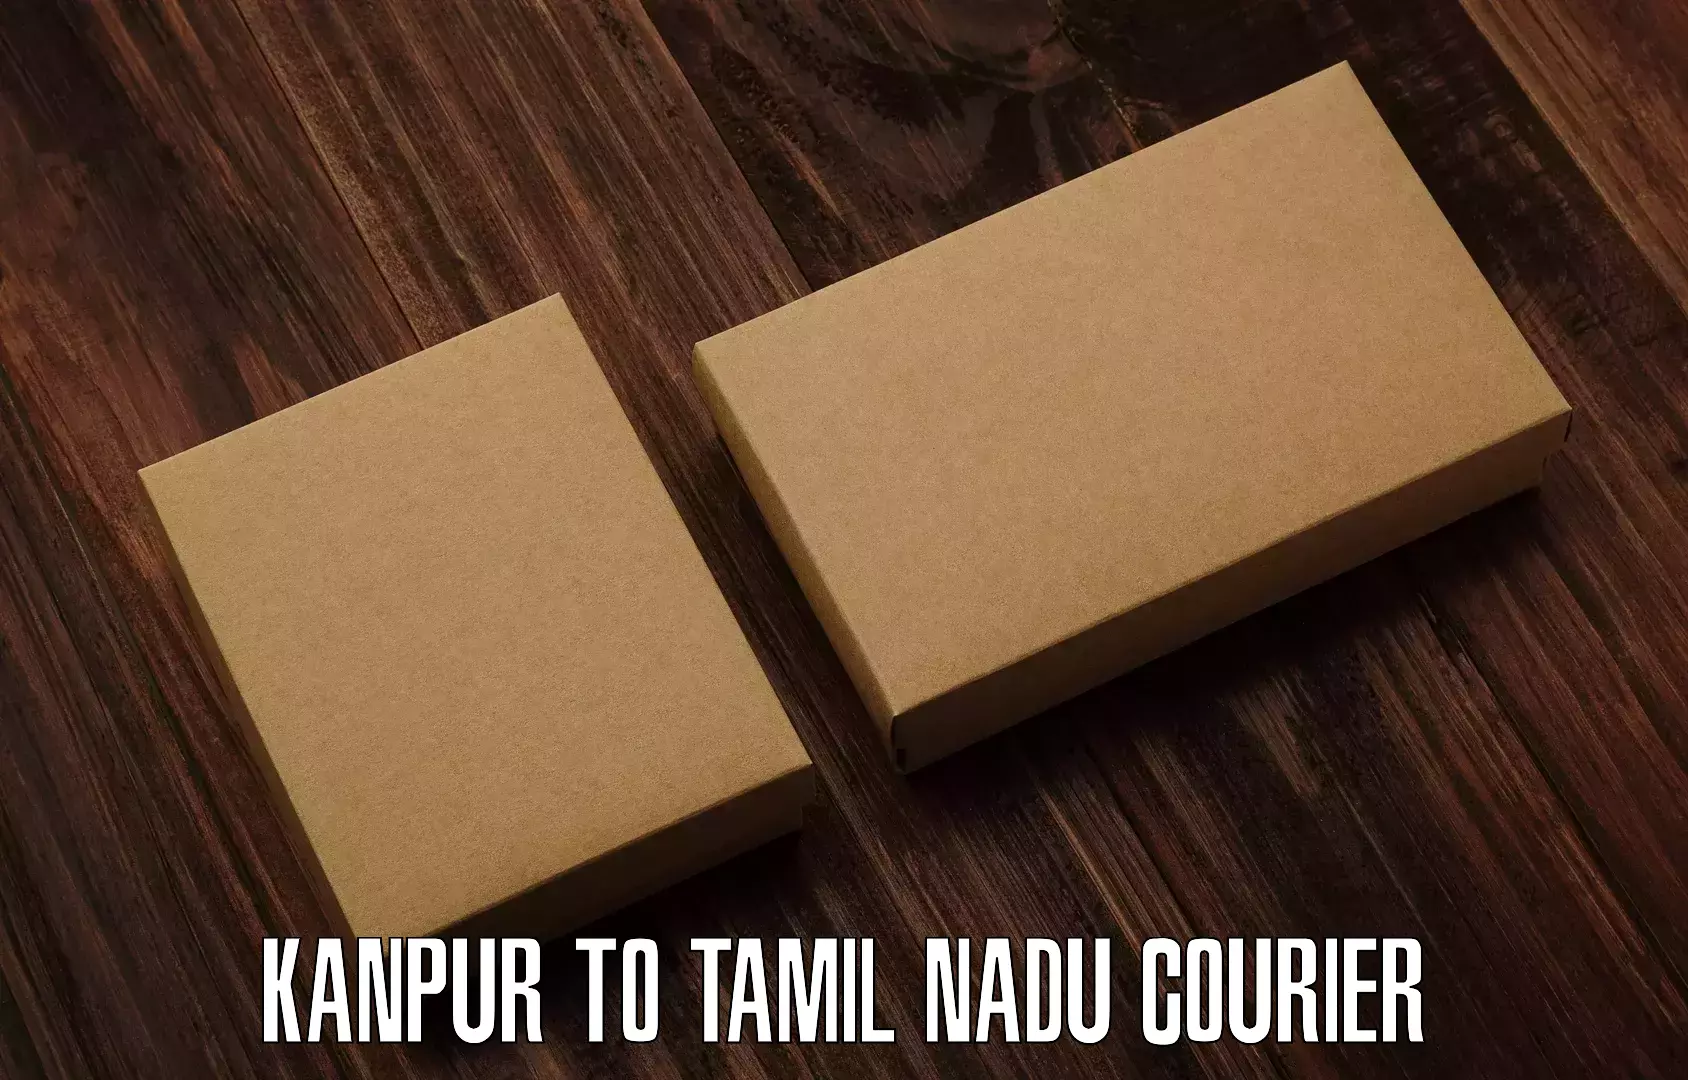 Reliable delivery network Kanpur to Tamil Nadu